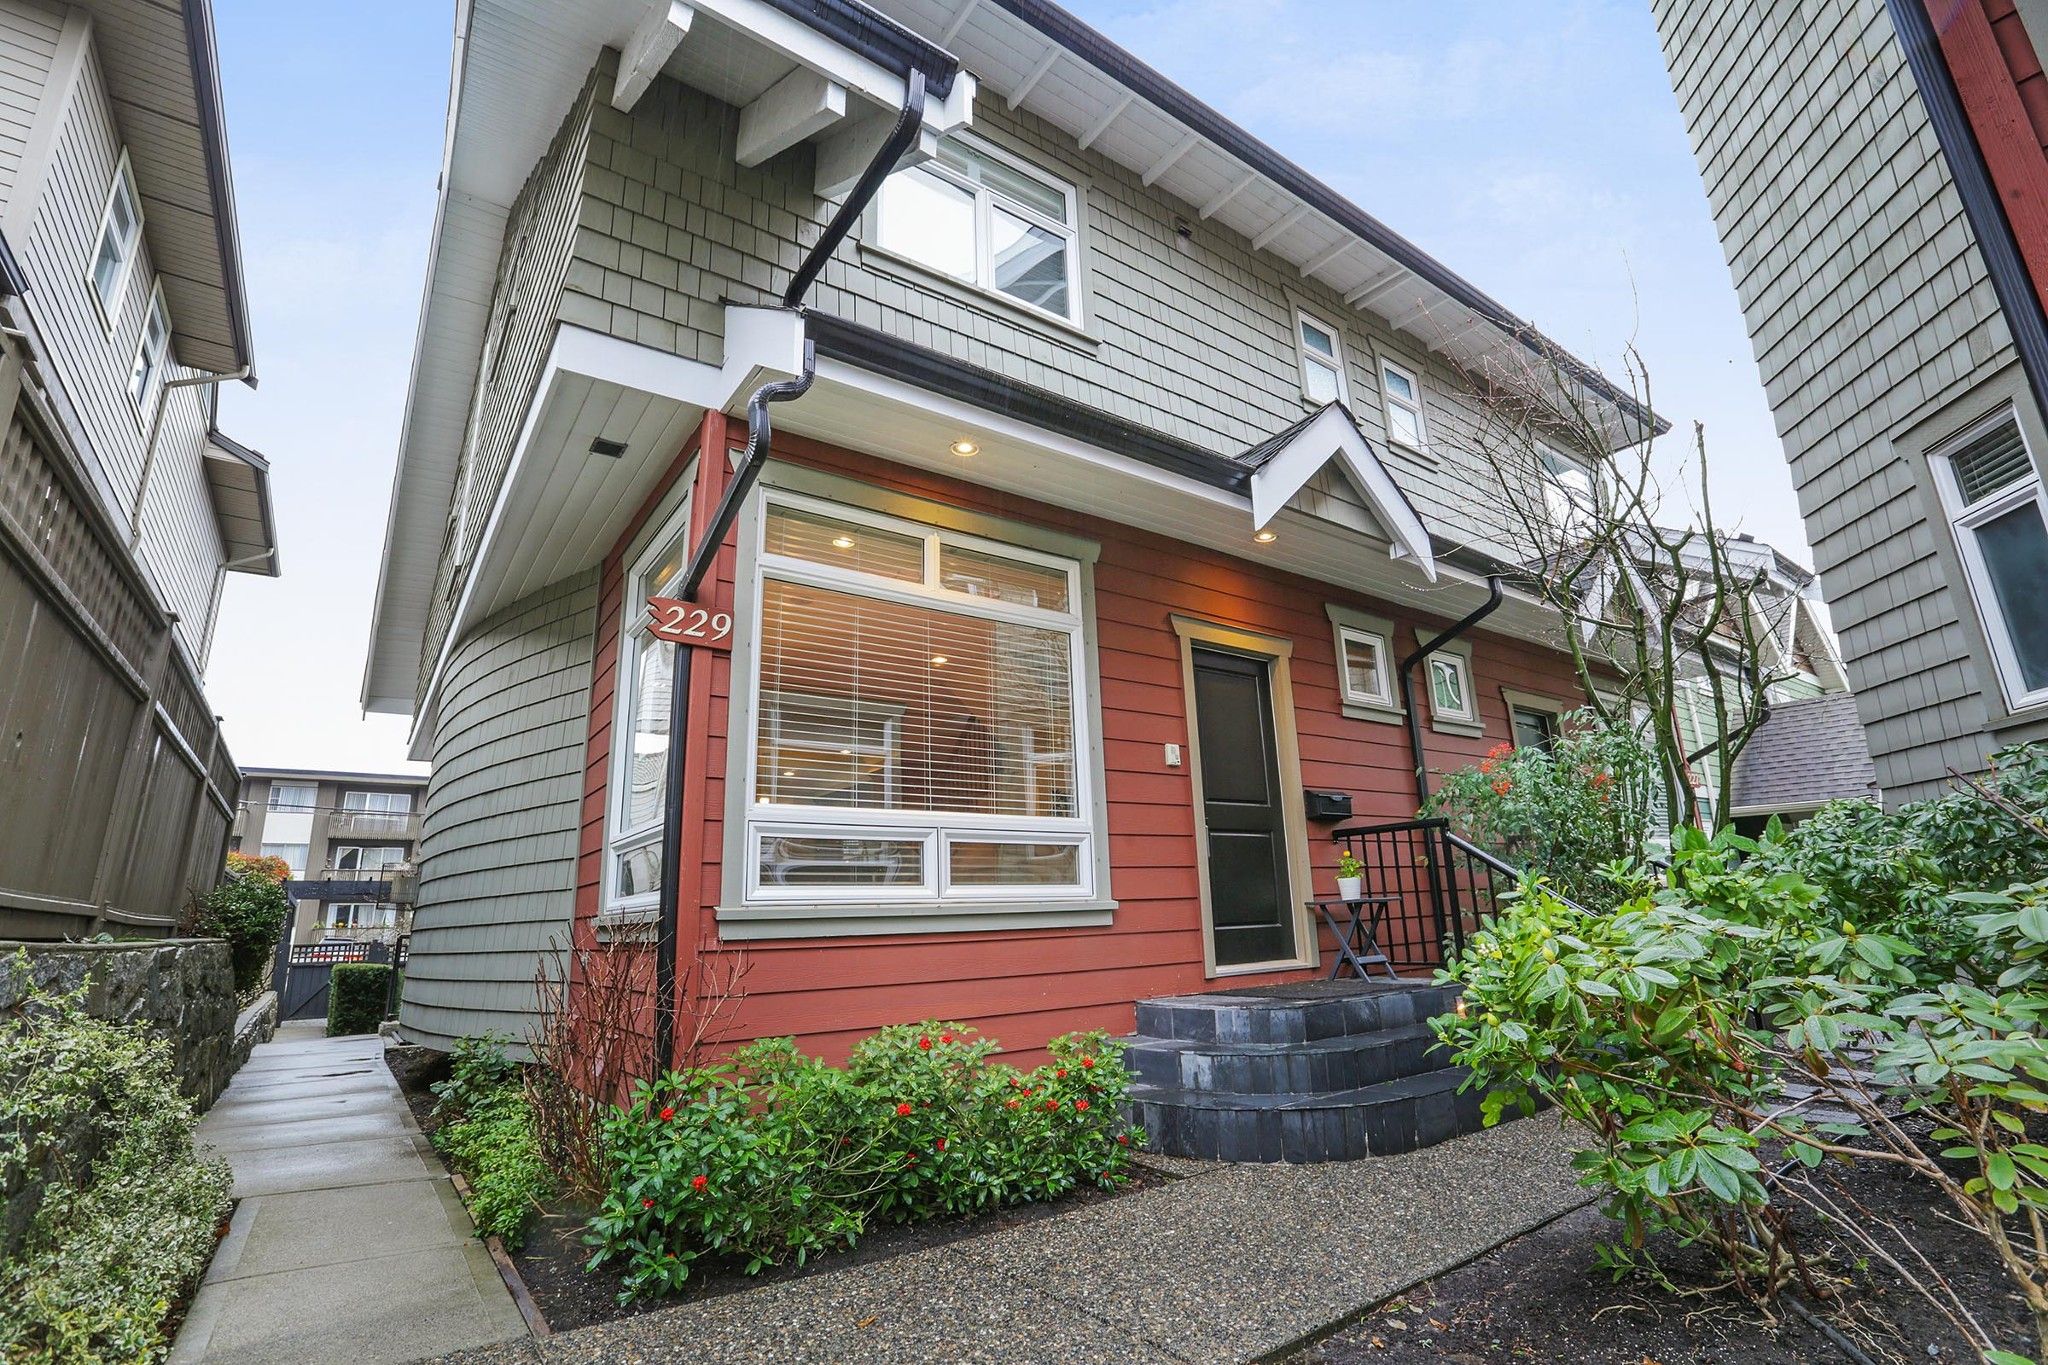 Main Photo: 229 E 17TH Street in North Vancouver: Central Lonsdale 1/2 Duplex for sale : MLS®# R2252507